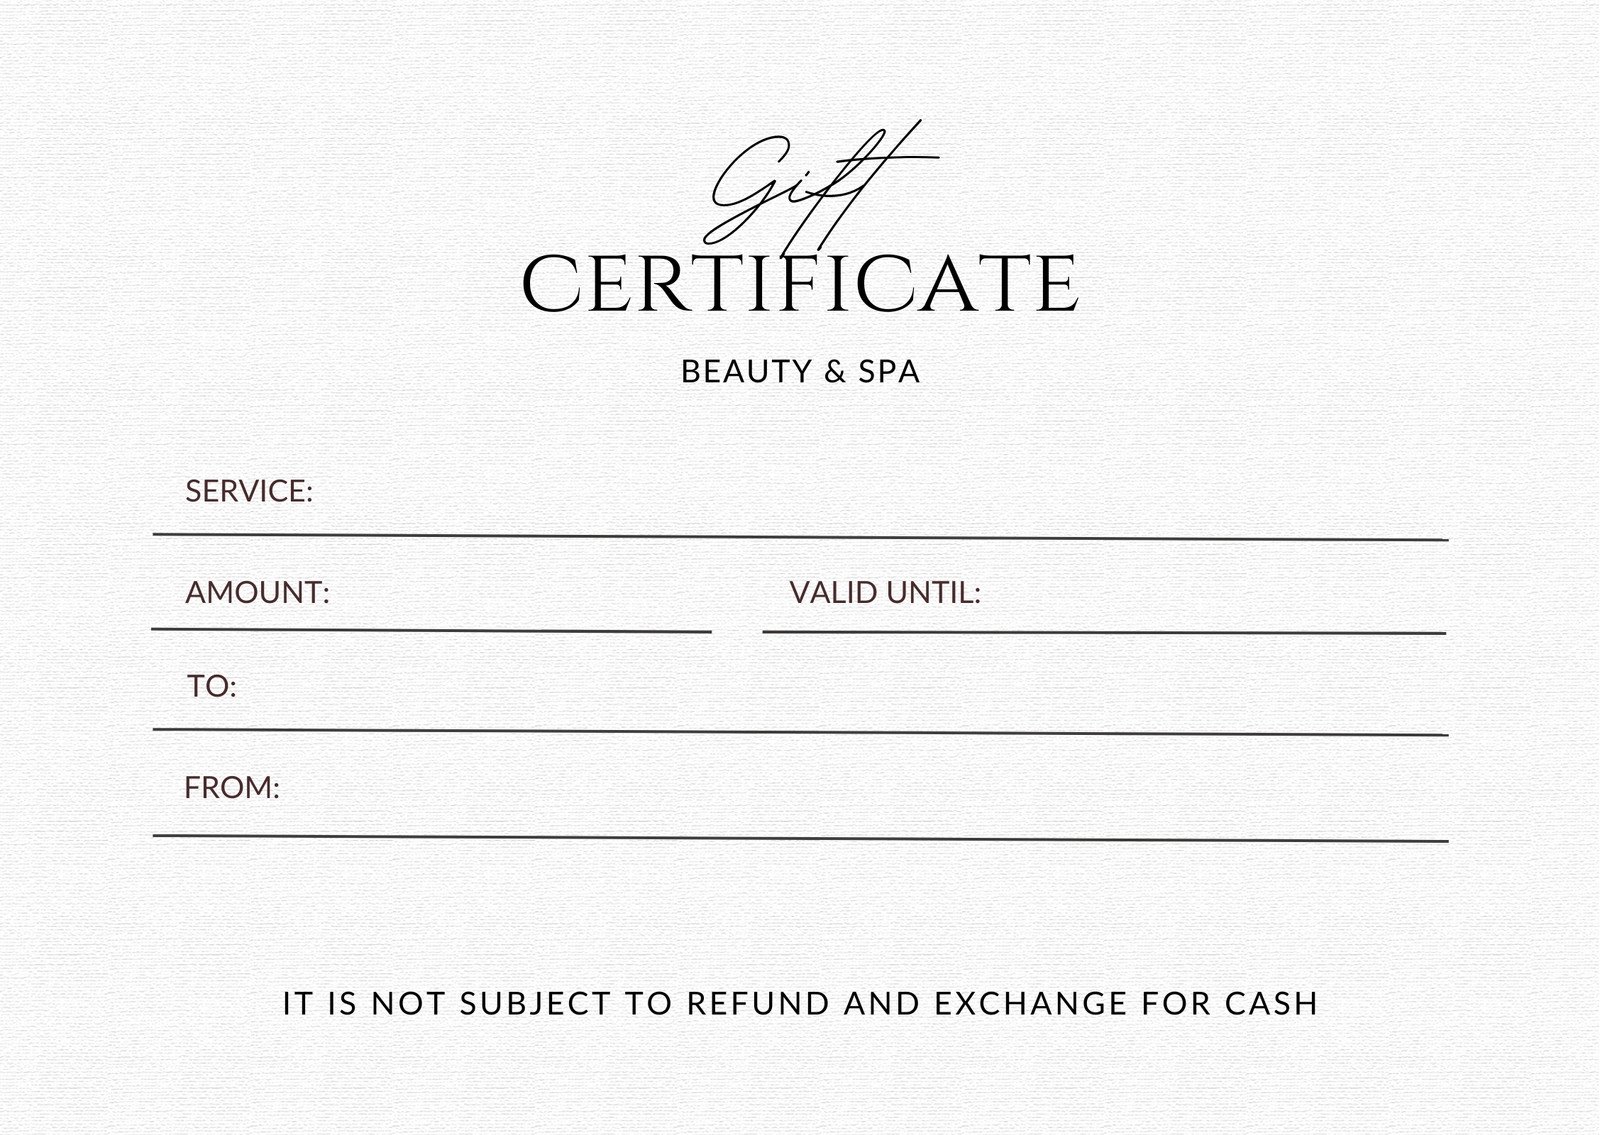 Free, printable gift certificate templates to customize